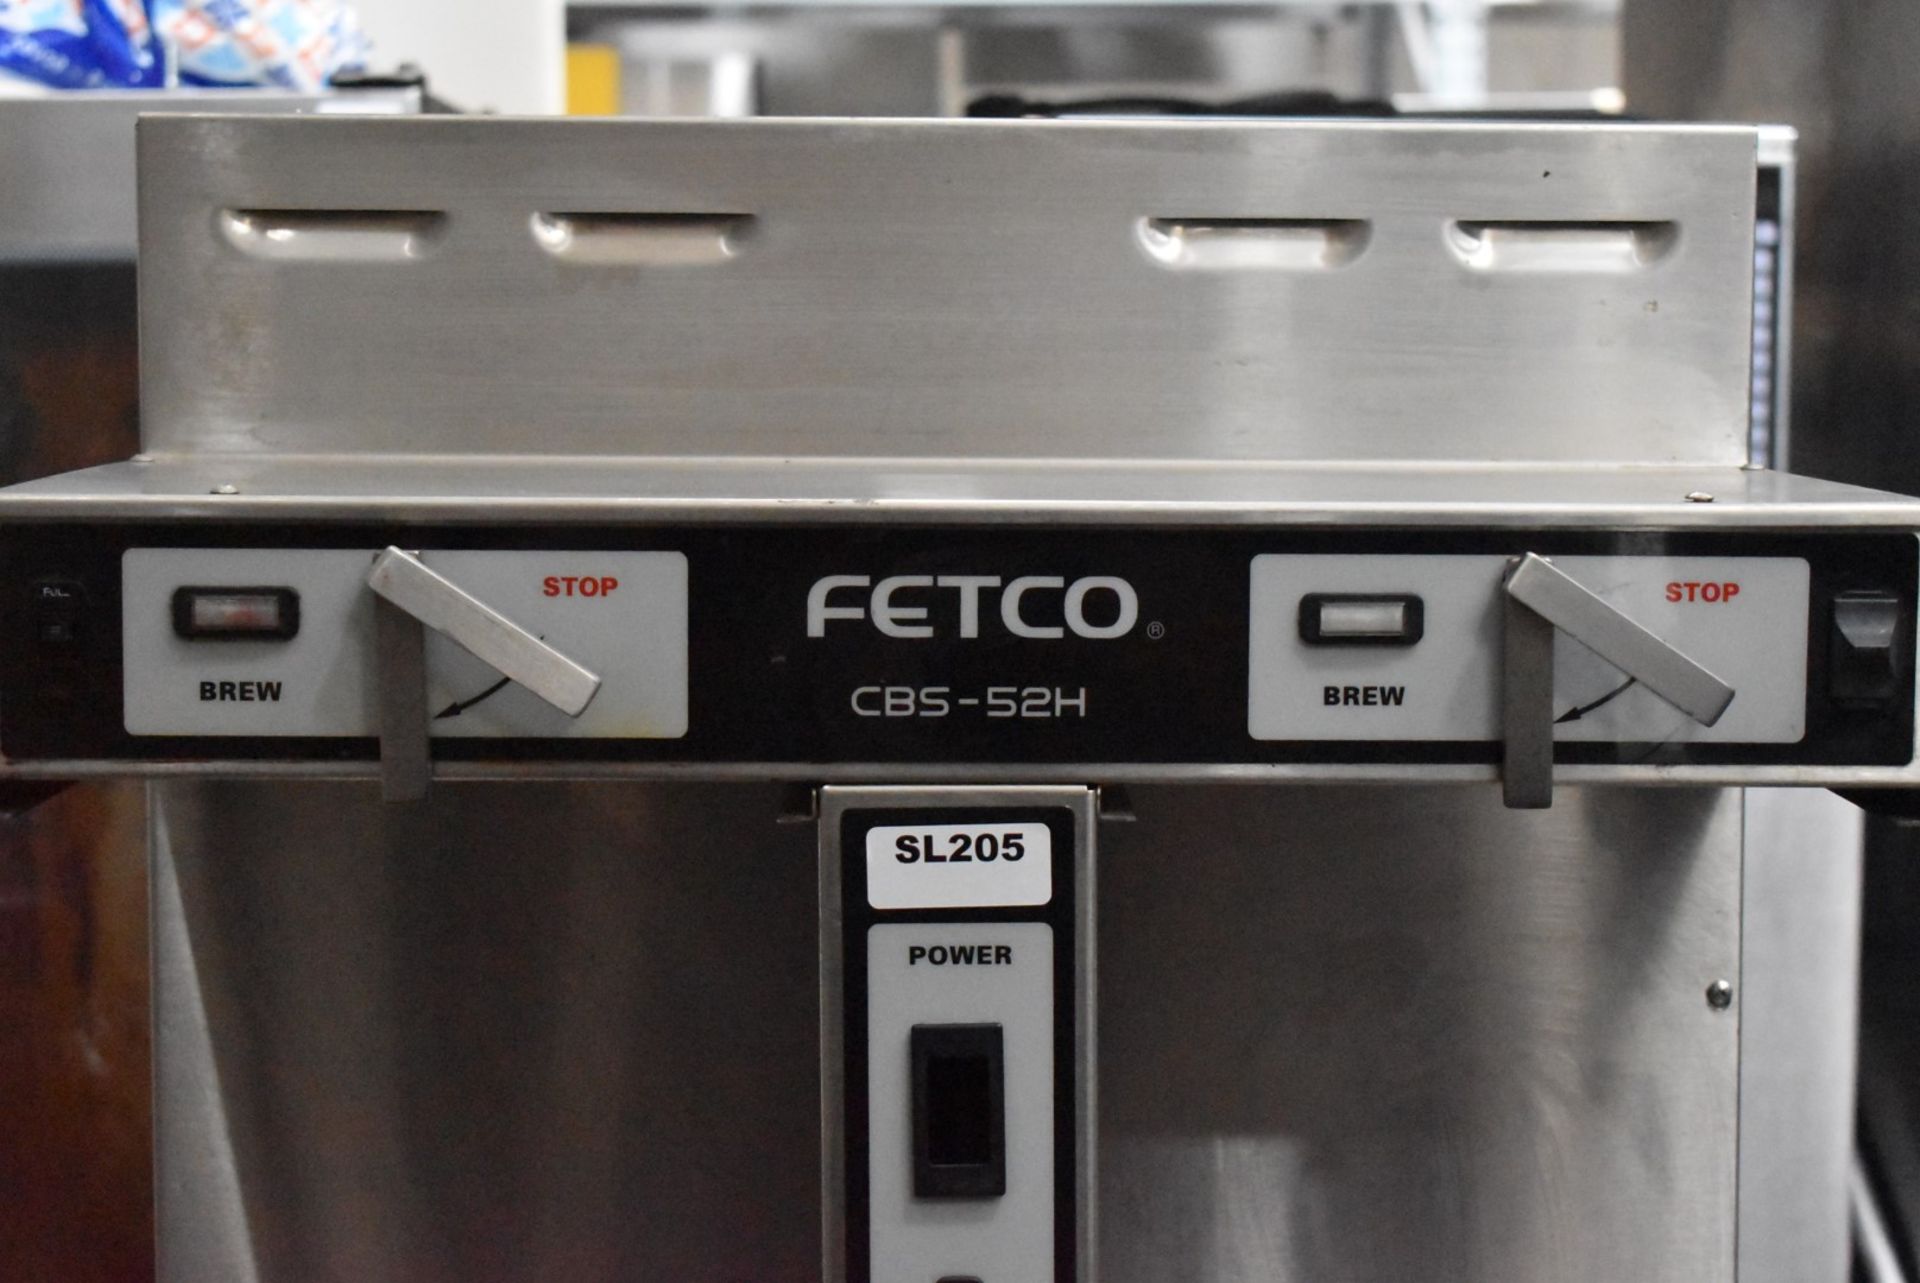 1 x Fetco CBS-52H-15 Stainless Steel Twin Automatic Coffee Brewer - Please See Description - - Image 2 of 10